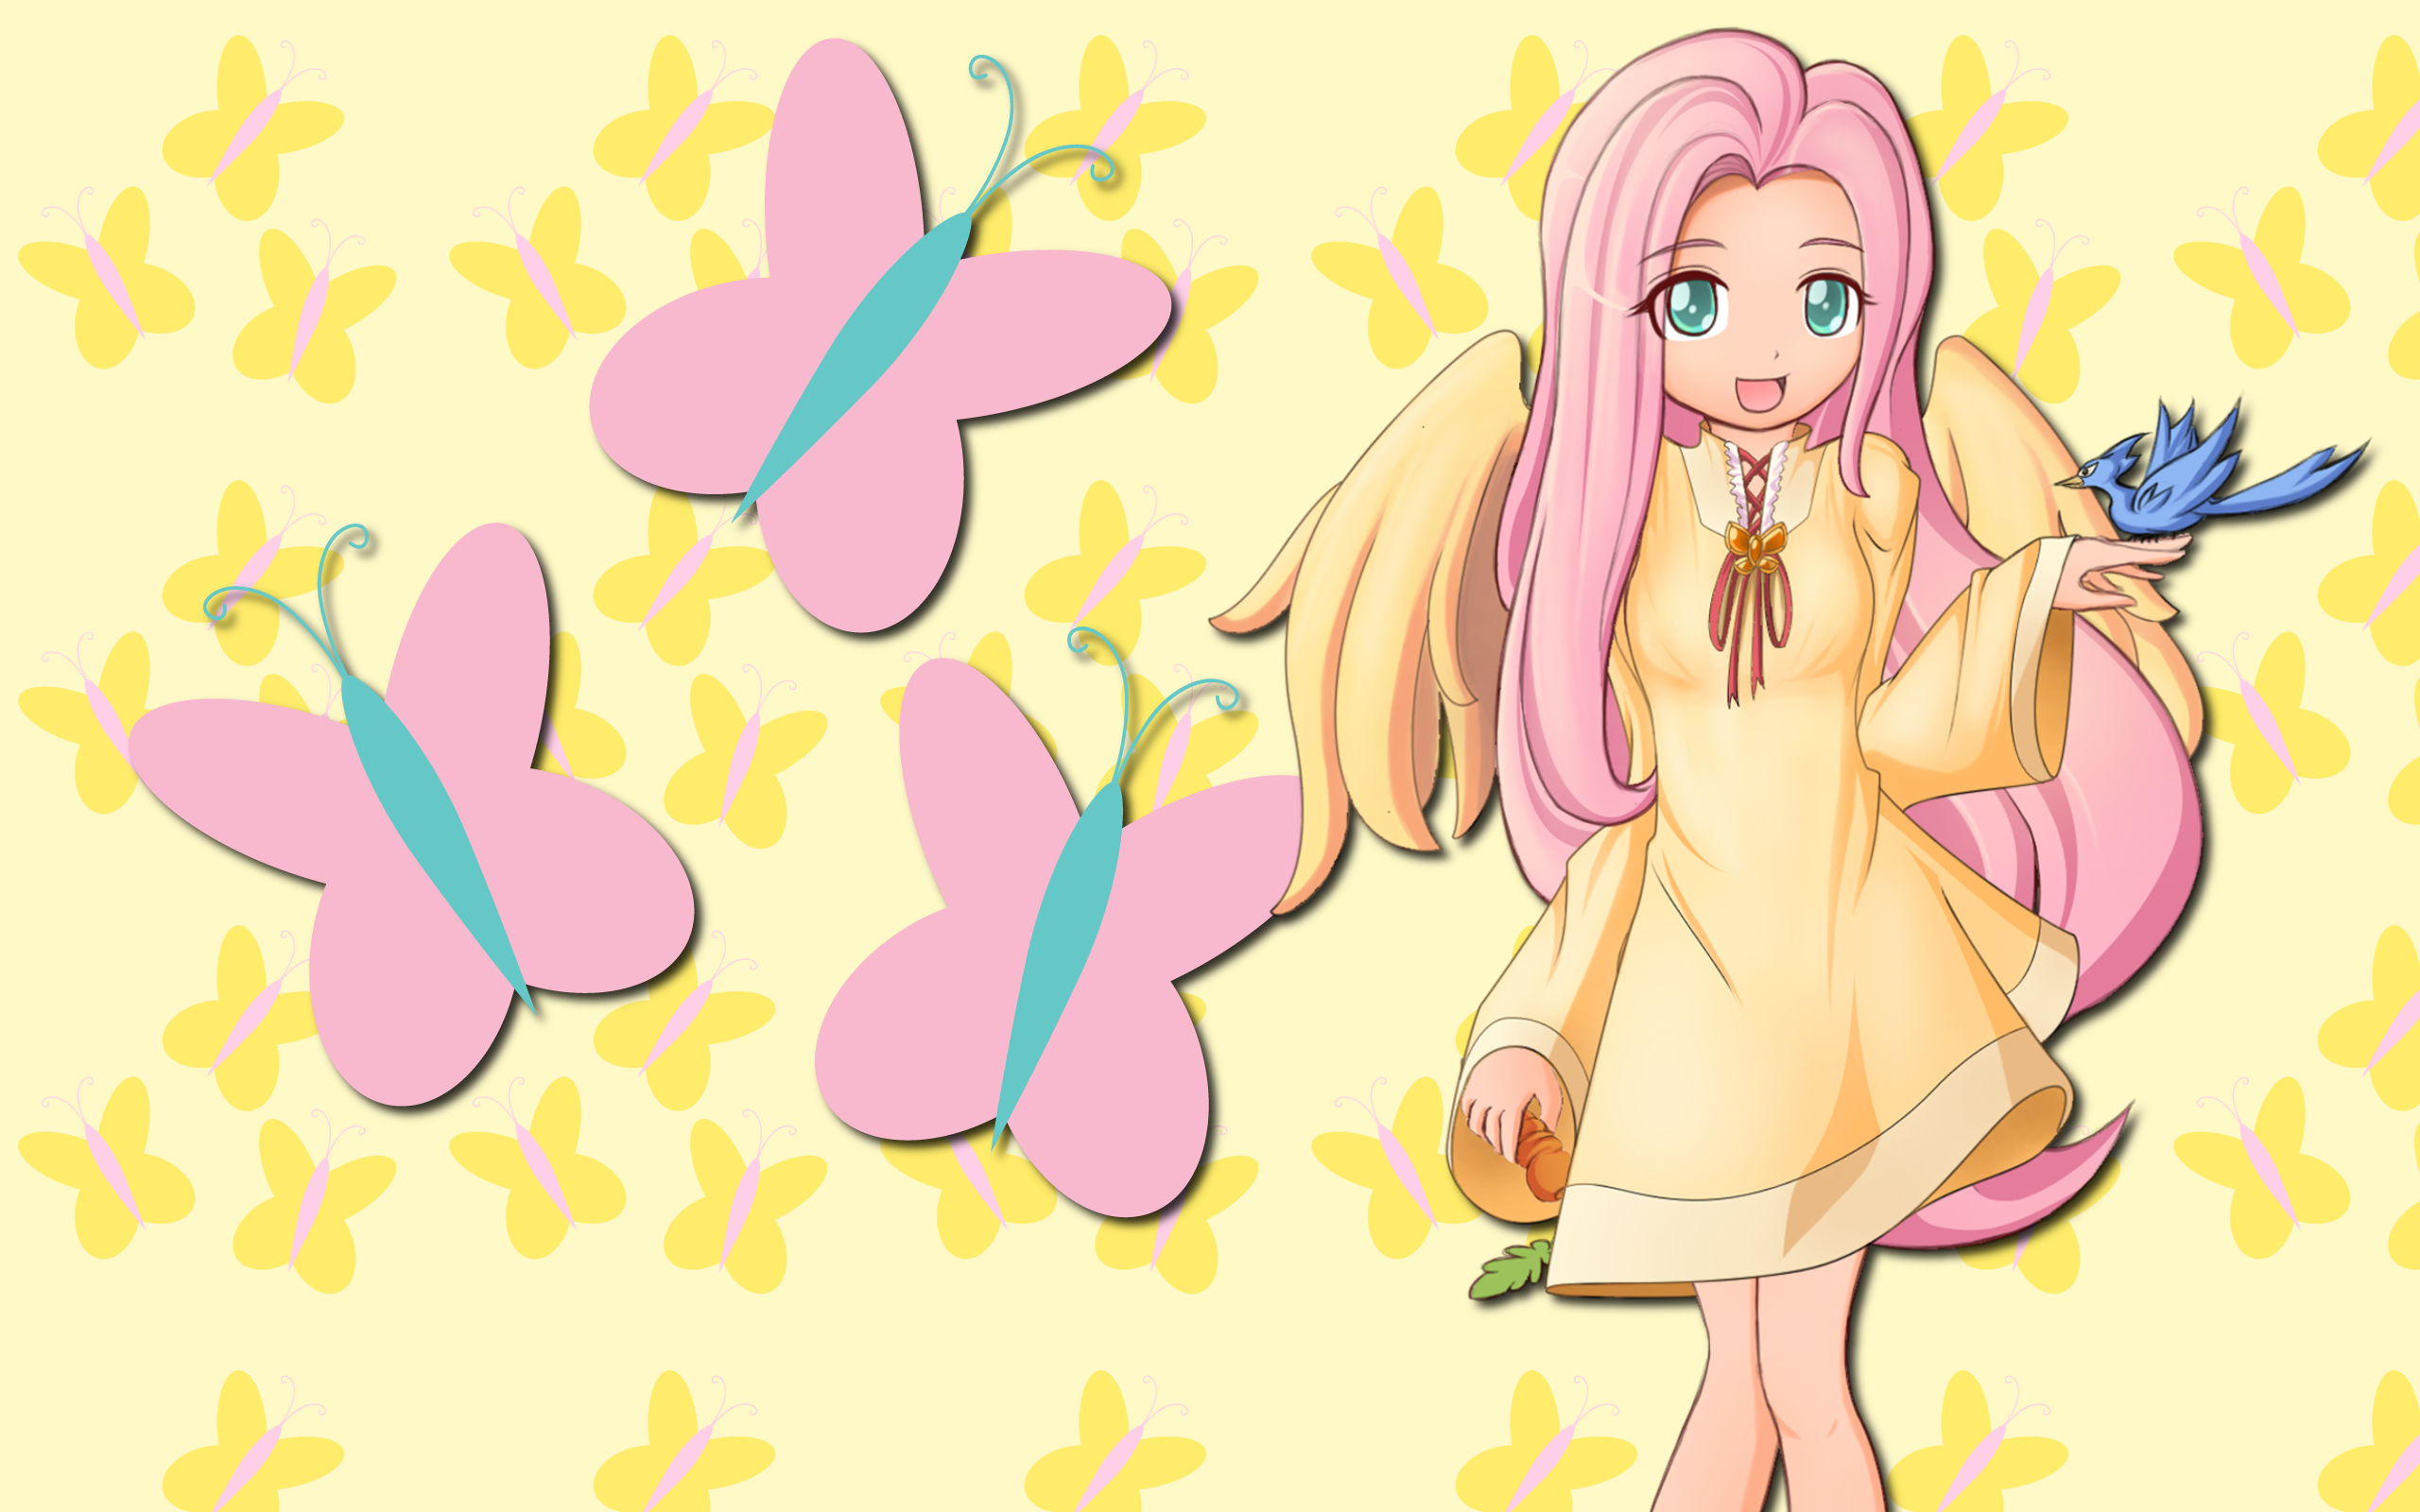 Human Fluttershy WP by AliceHumanSacrifice0, ooklah and Seiryuga